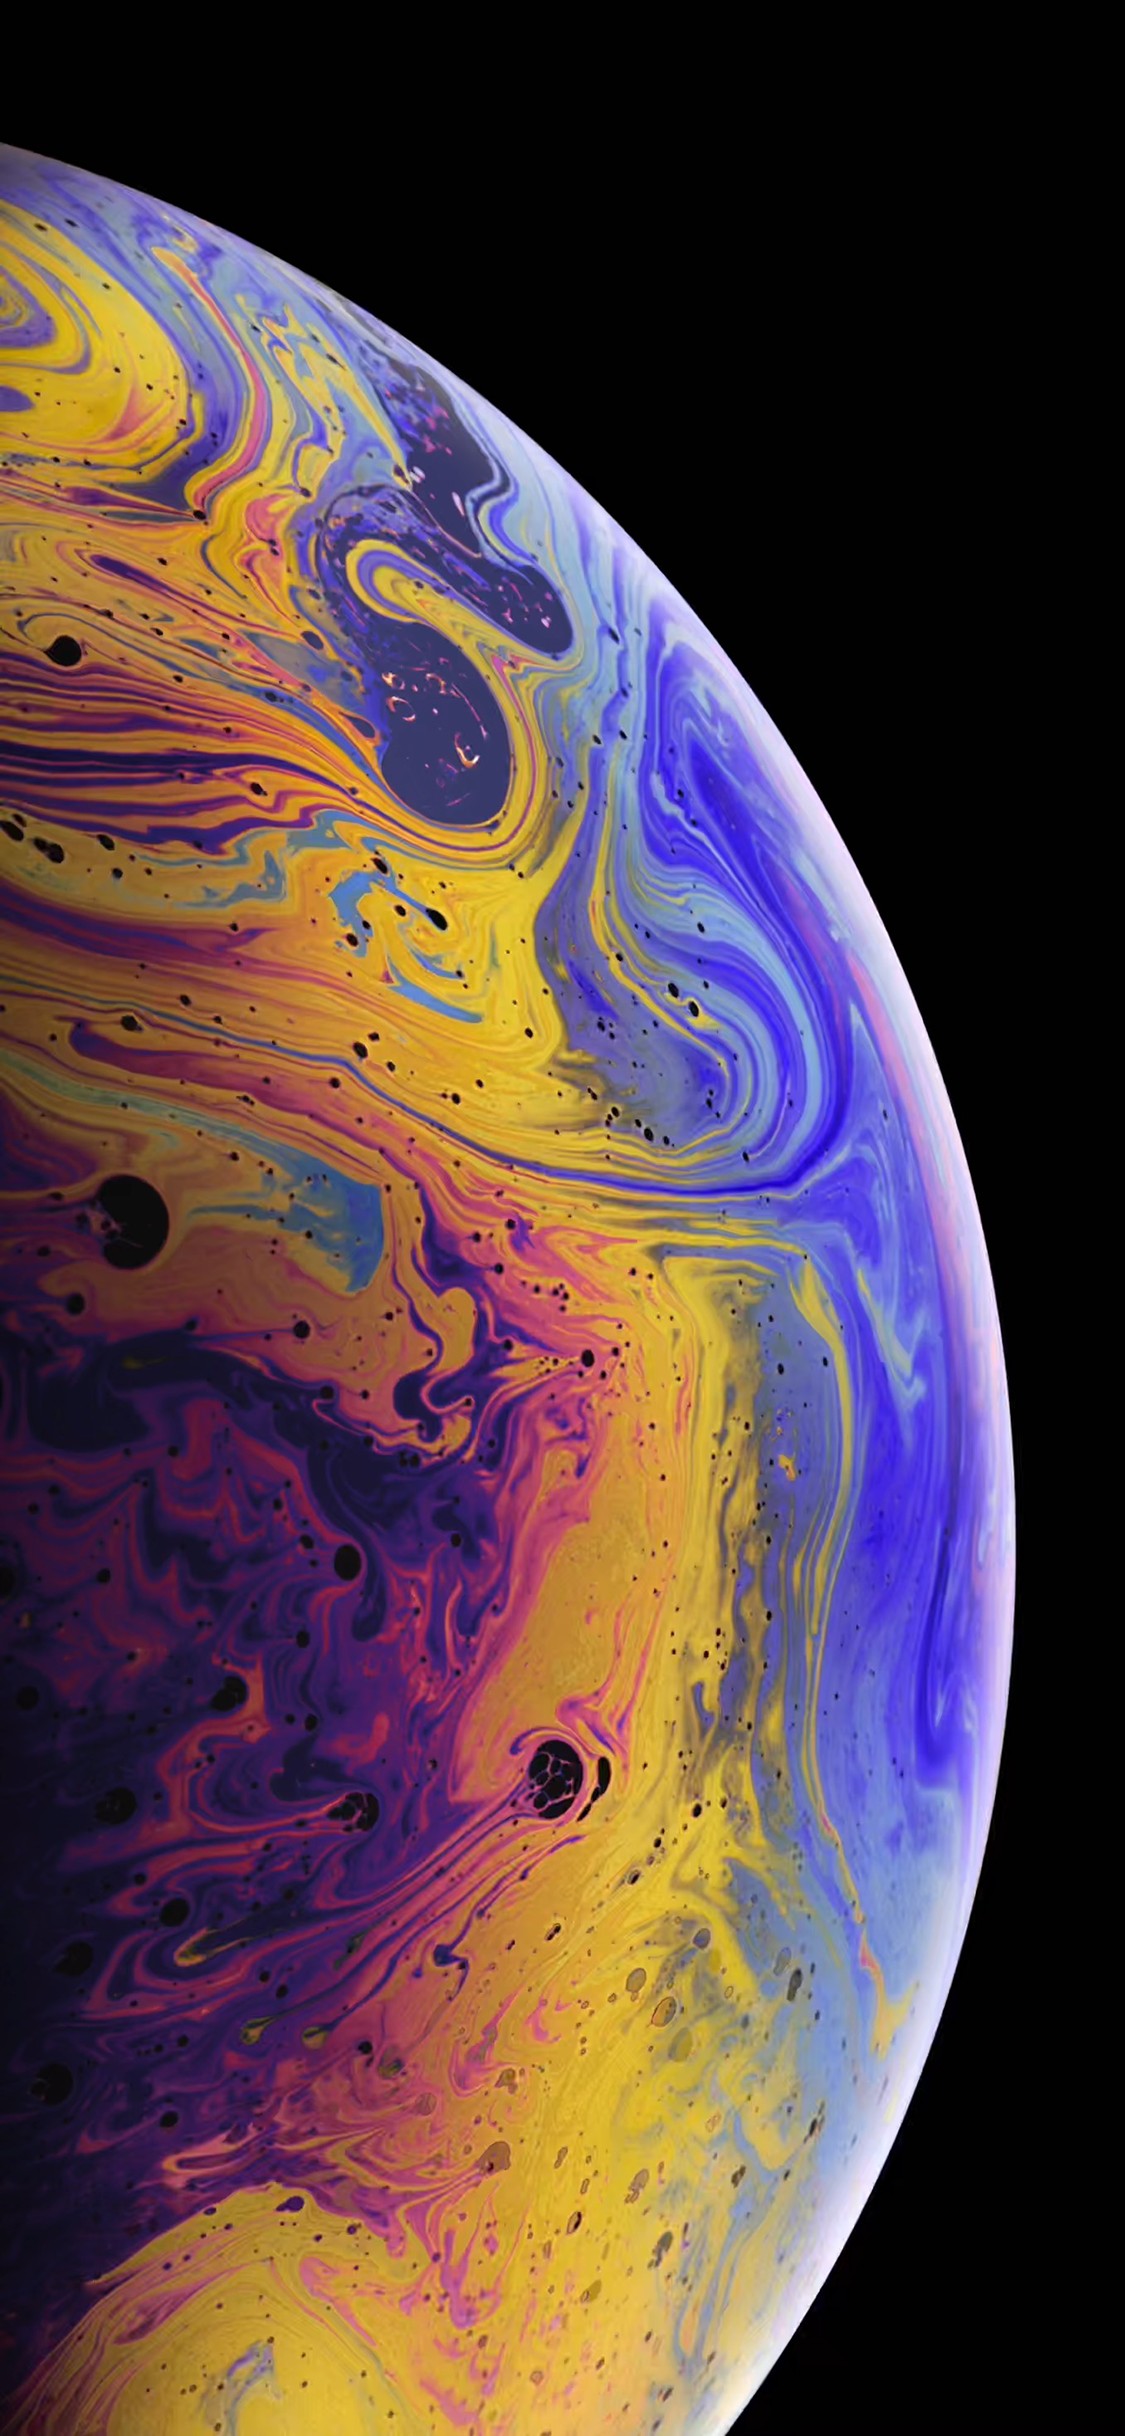 iPhone XS Wallpaper With high-resolution 1125X2436 pixel. You can set as wallpaper for Apple iPhone X, XS Max, XR, 8, 7, 6, SE, iPad. Enjoy and share your favorite HD wallpapers and background images